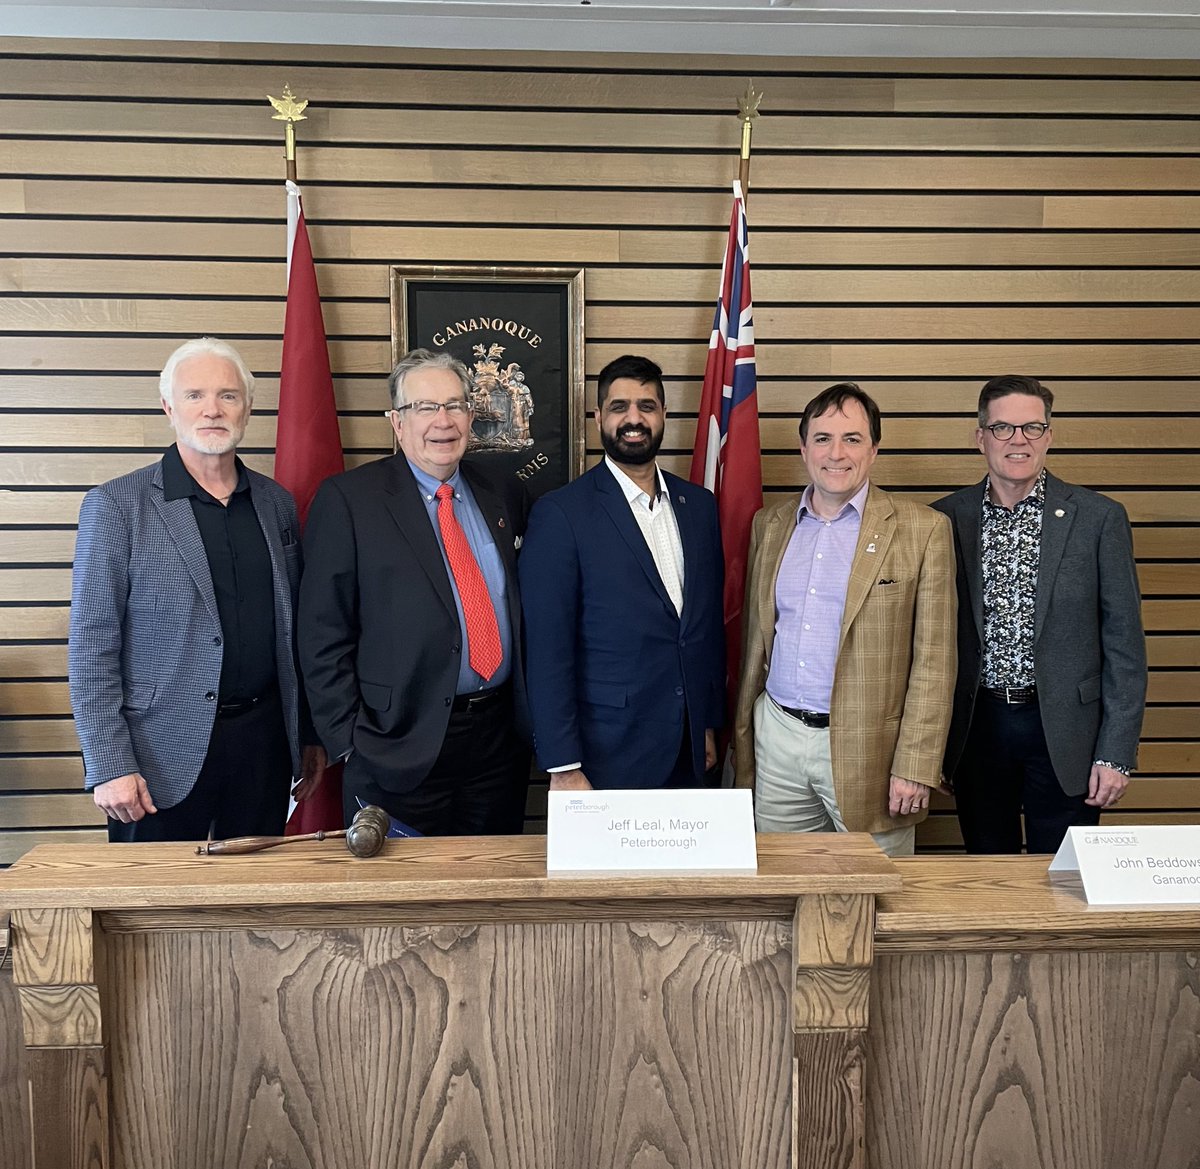 Today I was in beautiful Gananoque for a meeting with my colleagues in the Eastern Ontario Mayor’s Caucus! 

We discussed opportunities for collaboration on many issues facing all of our communities, including housing and mental health and addiction.